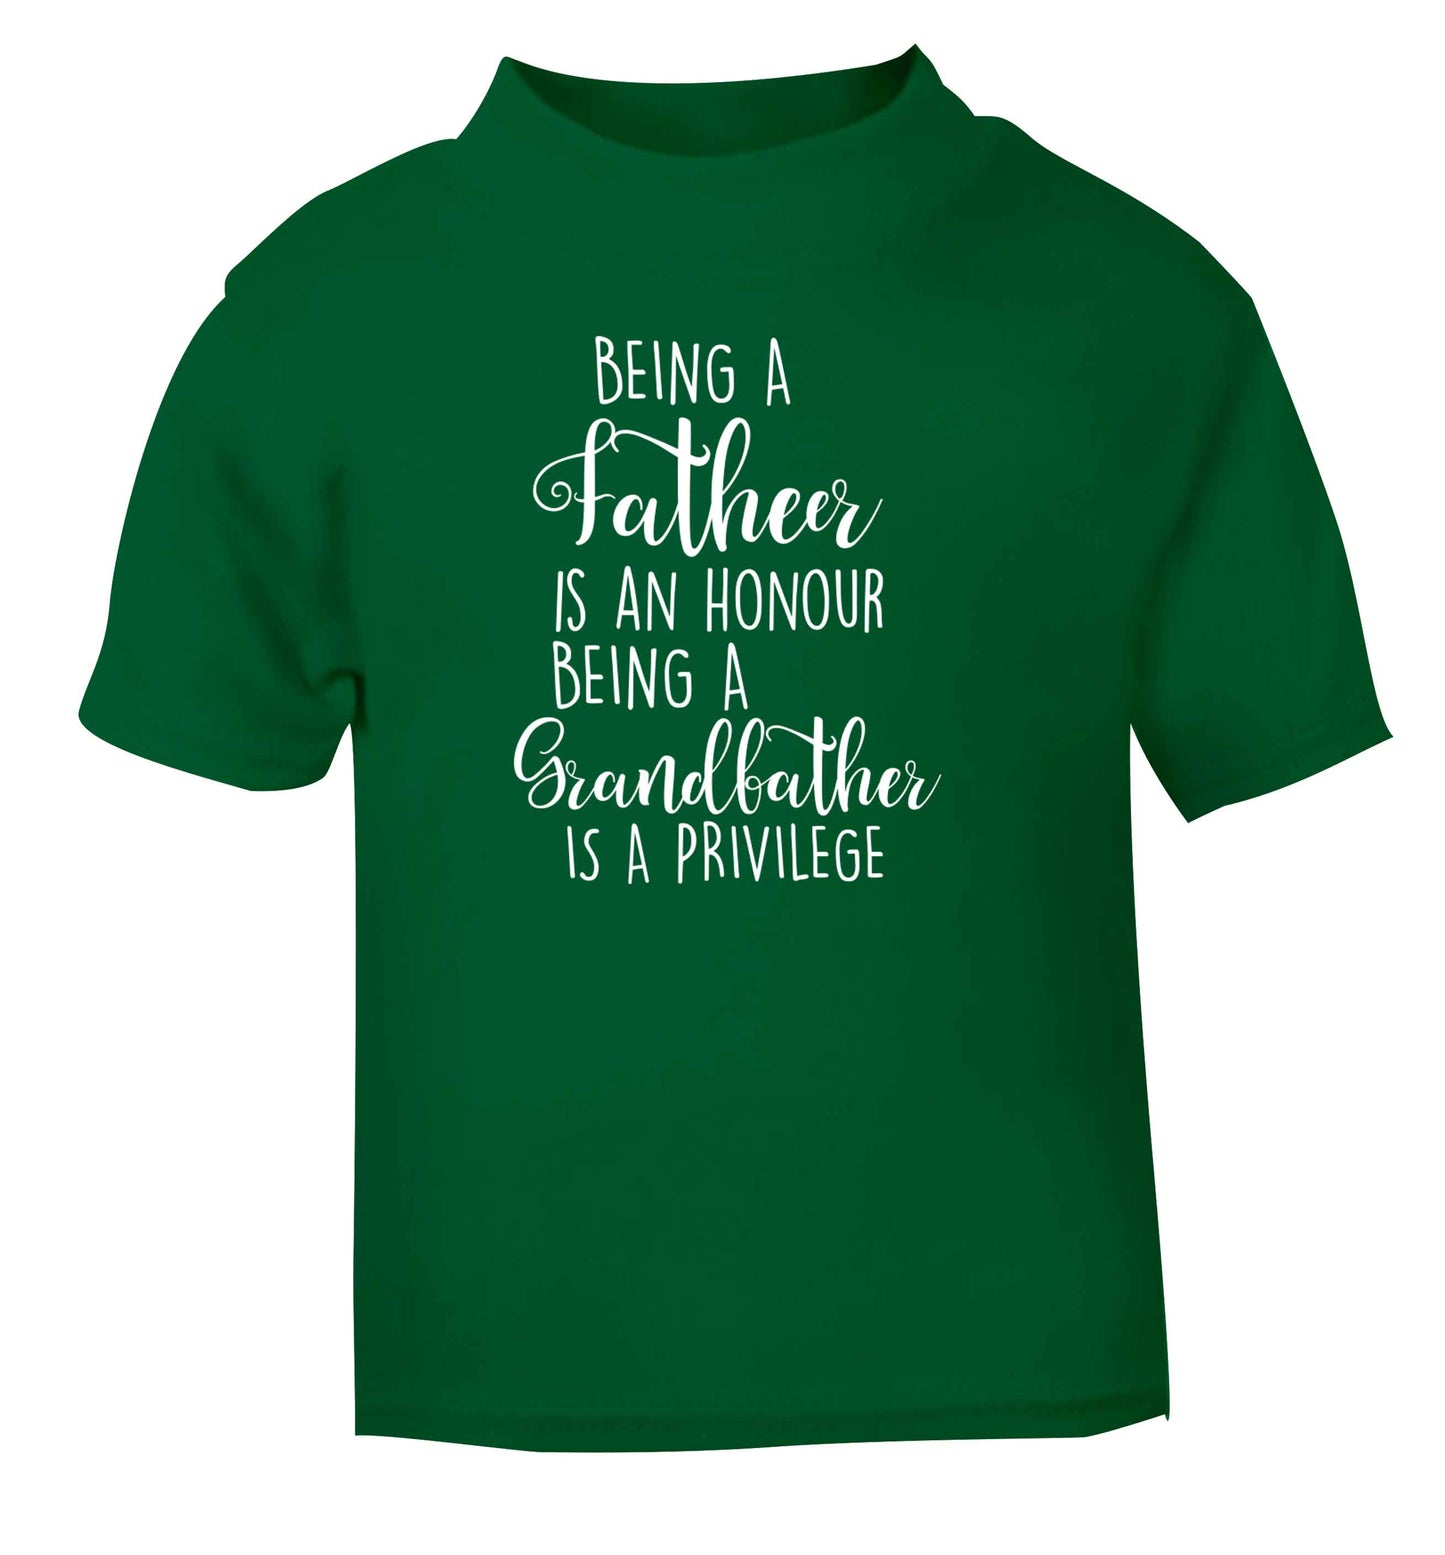 Being a father is an honour being a grandfather is a privilege green Baby Toddler Tshirt 2 Years